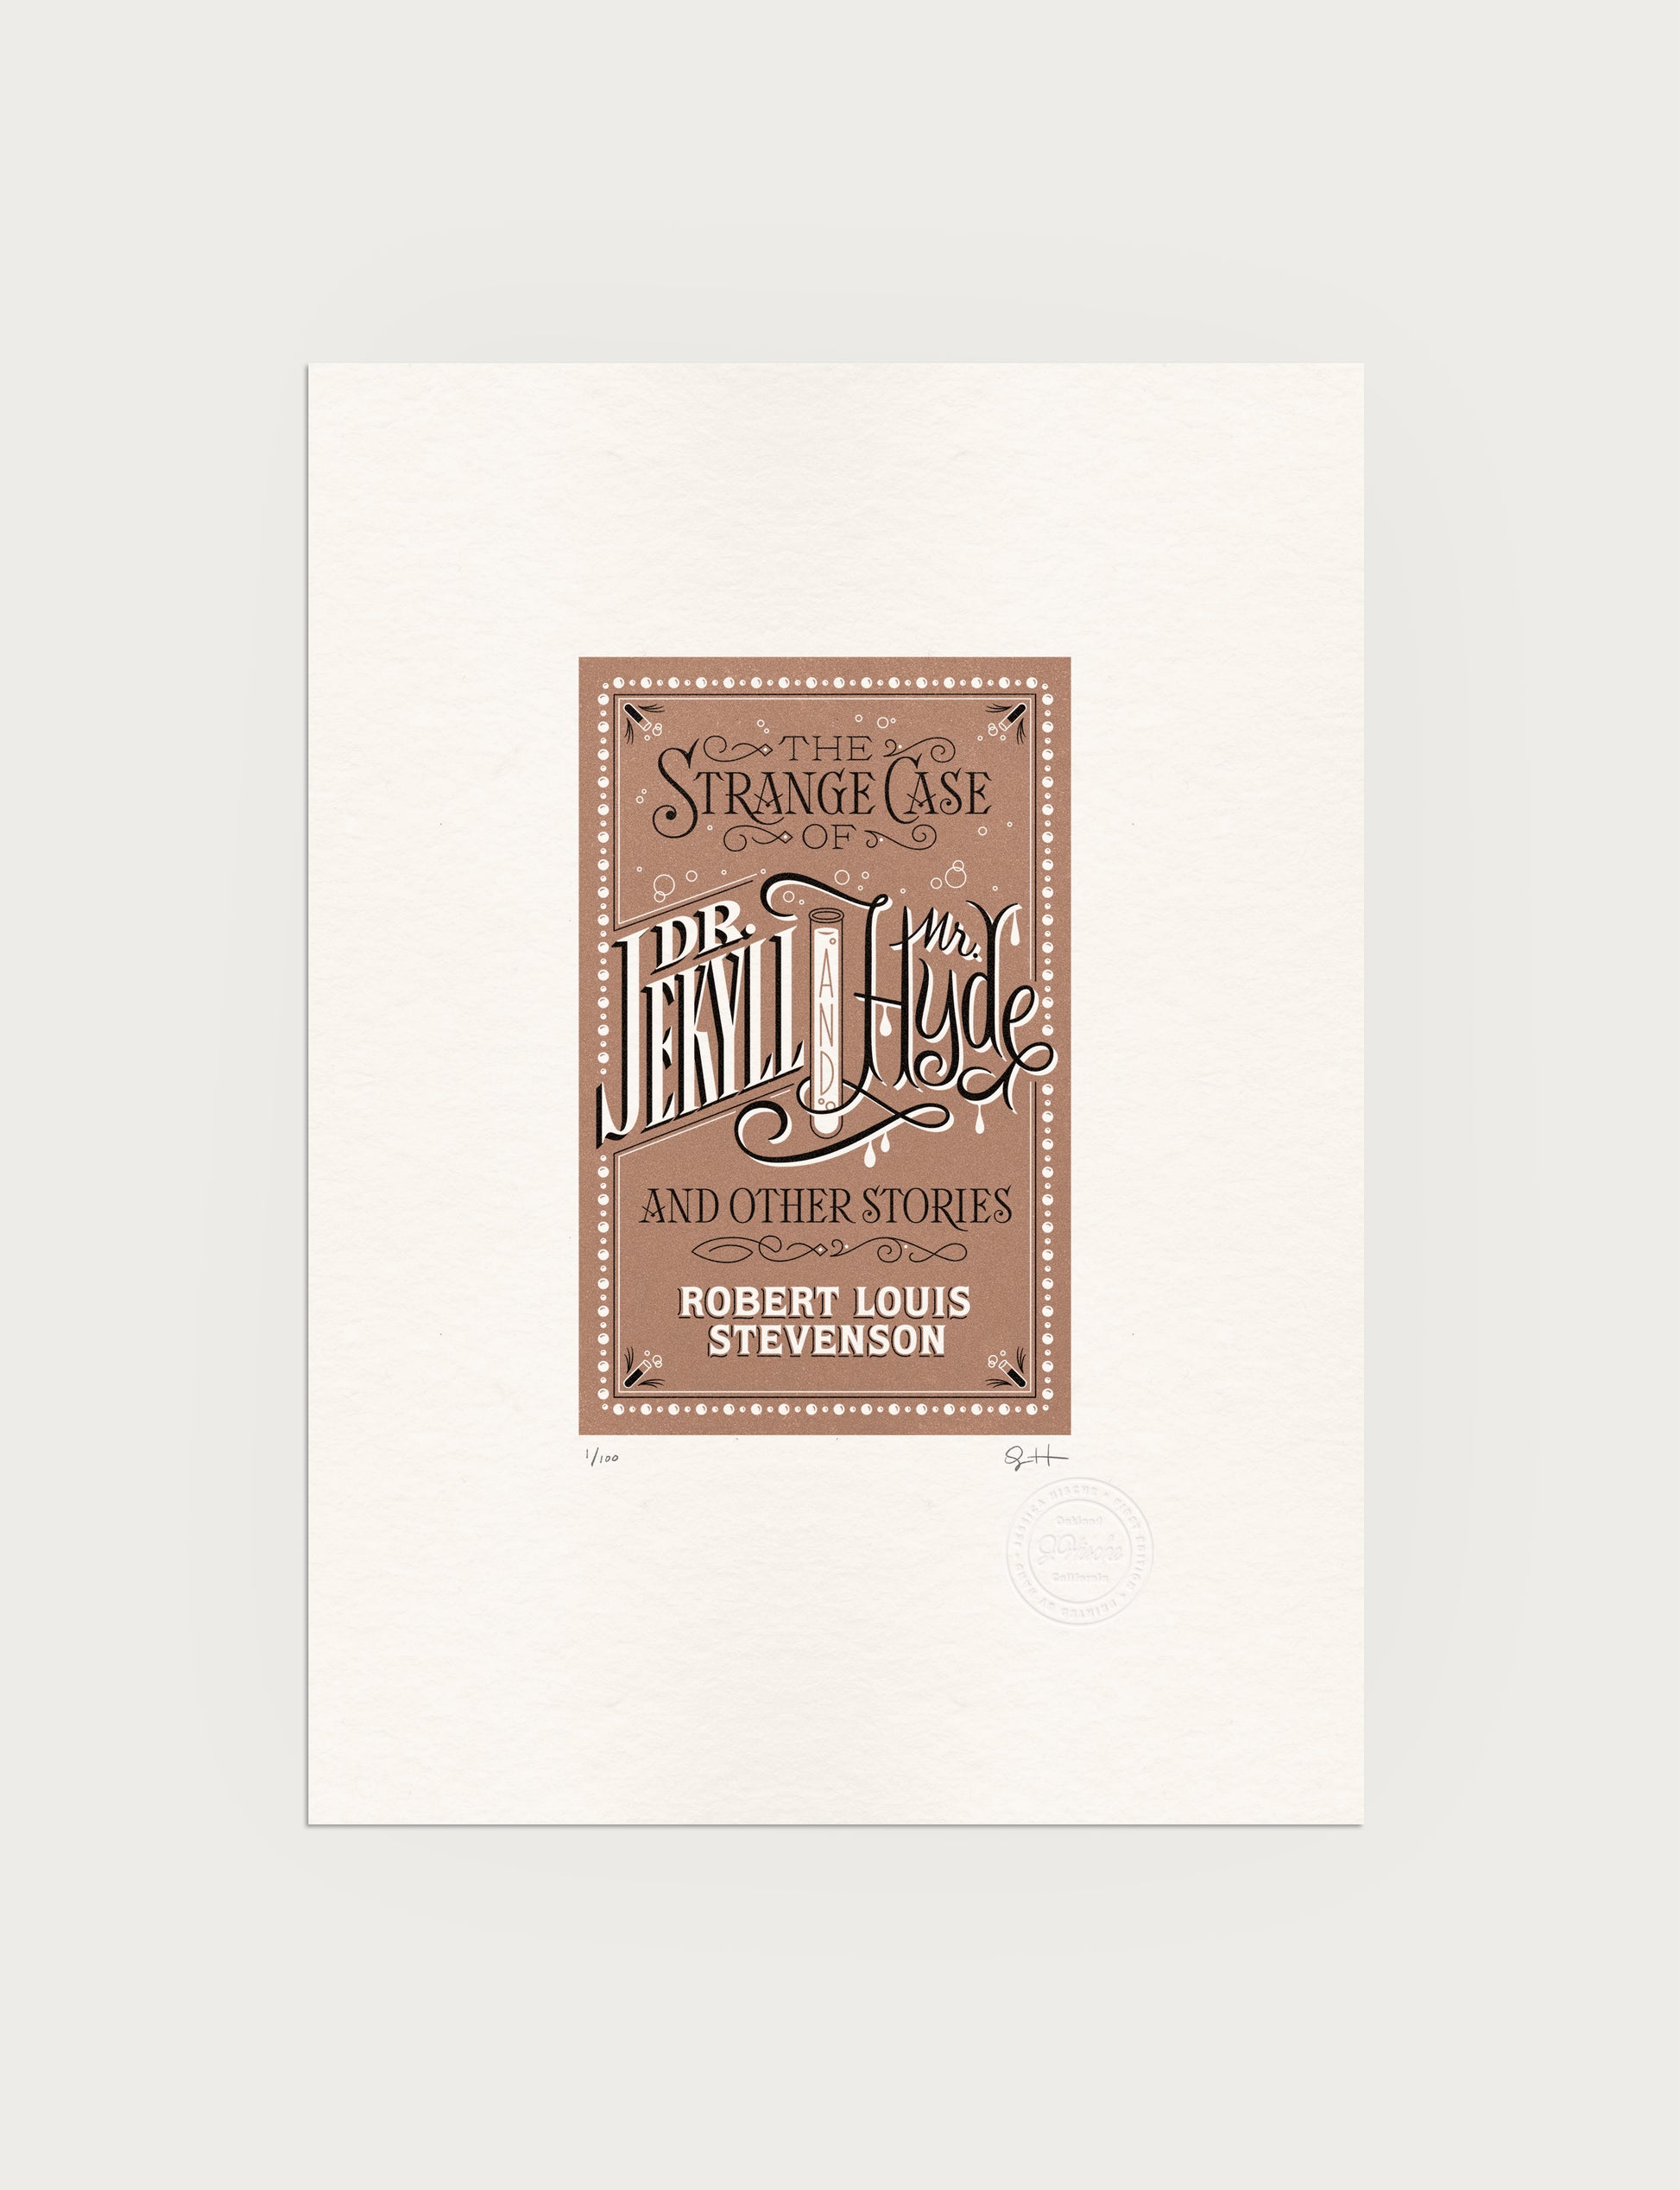 2-color letterpress print in brown and black. Printed artwork is an illustrated book cover of Dr. Jekyll and Mr. Hyde including custom hand lettering.